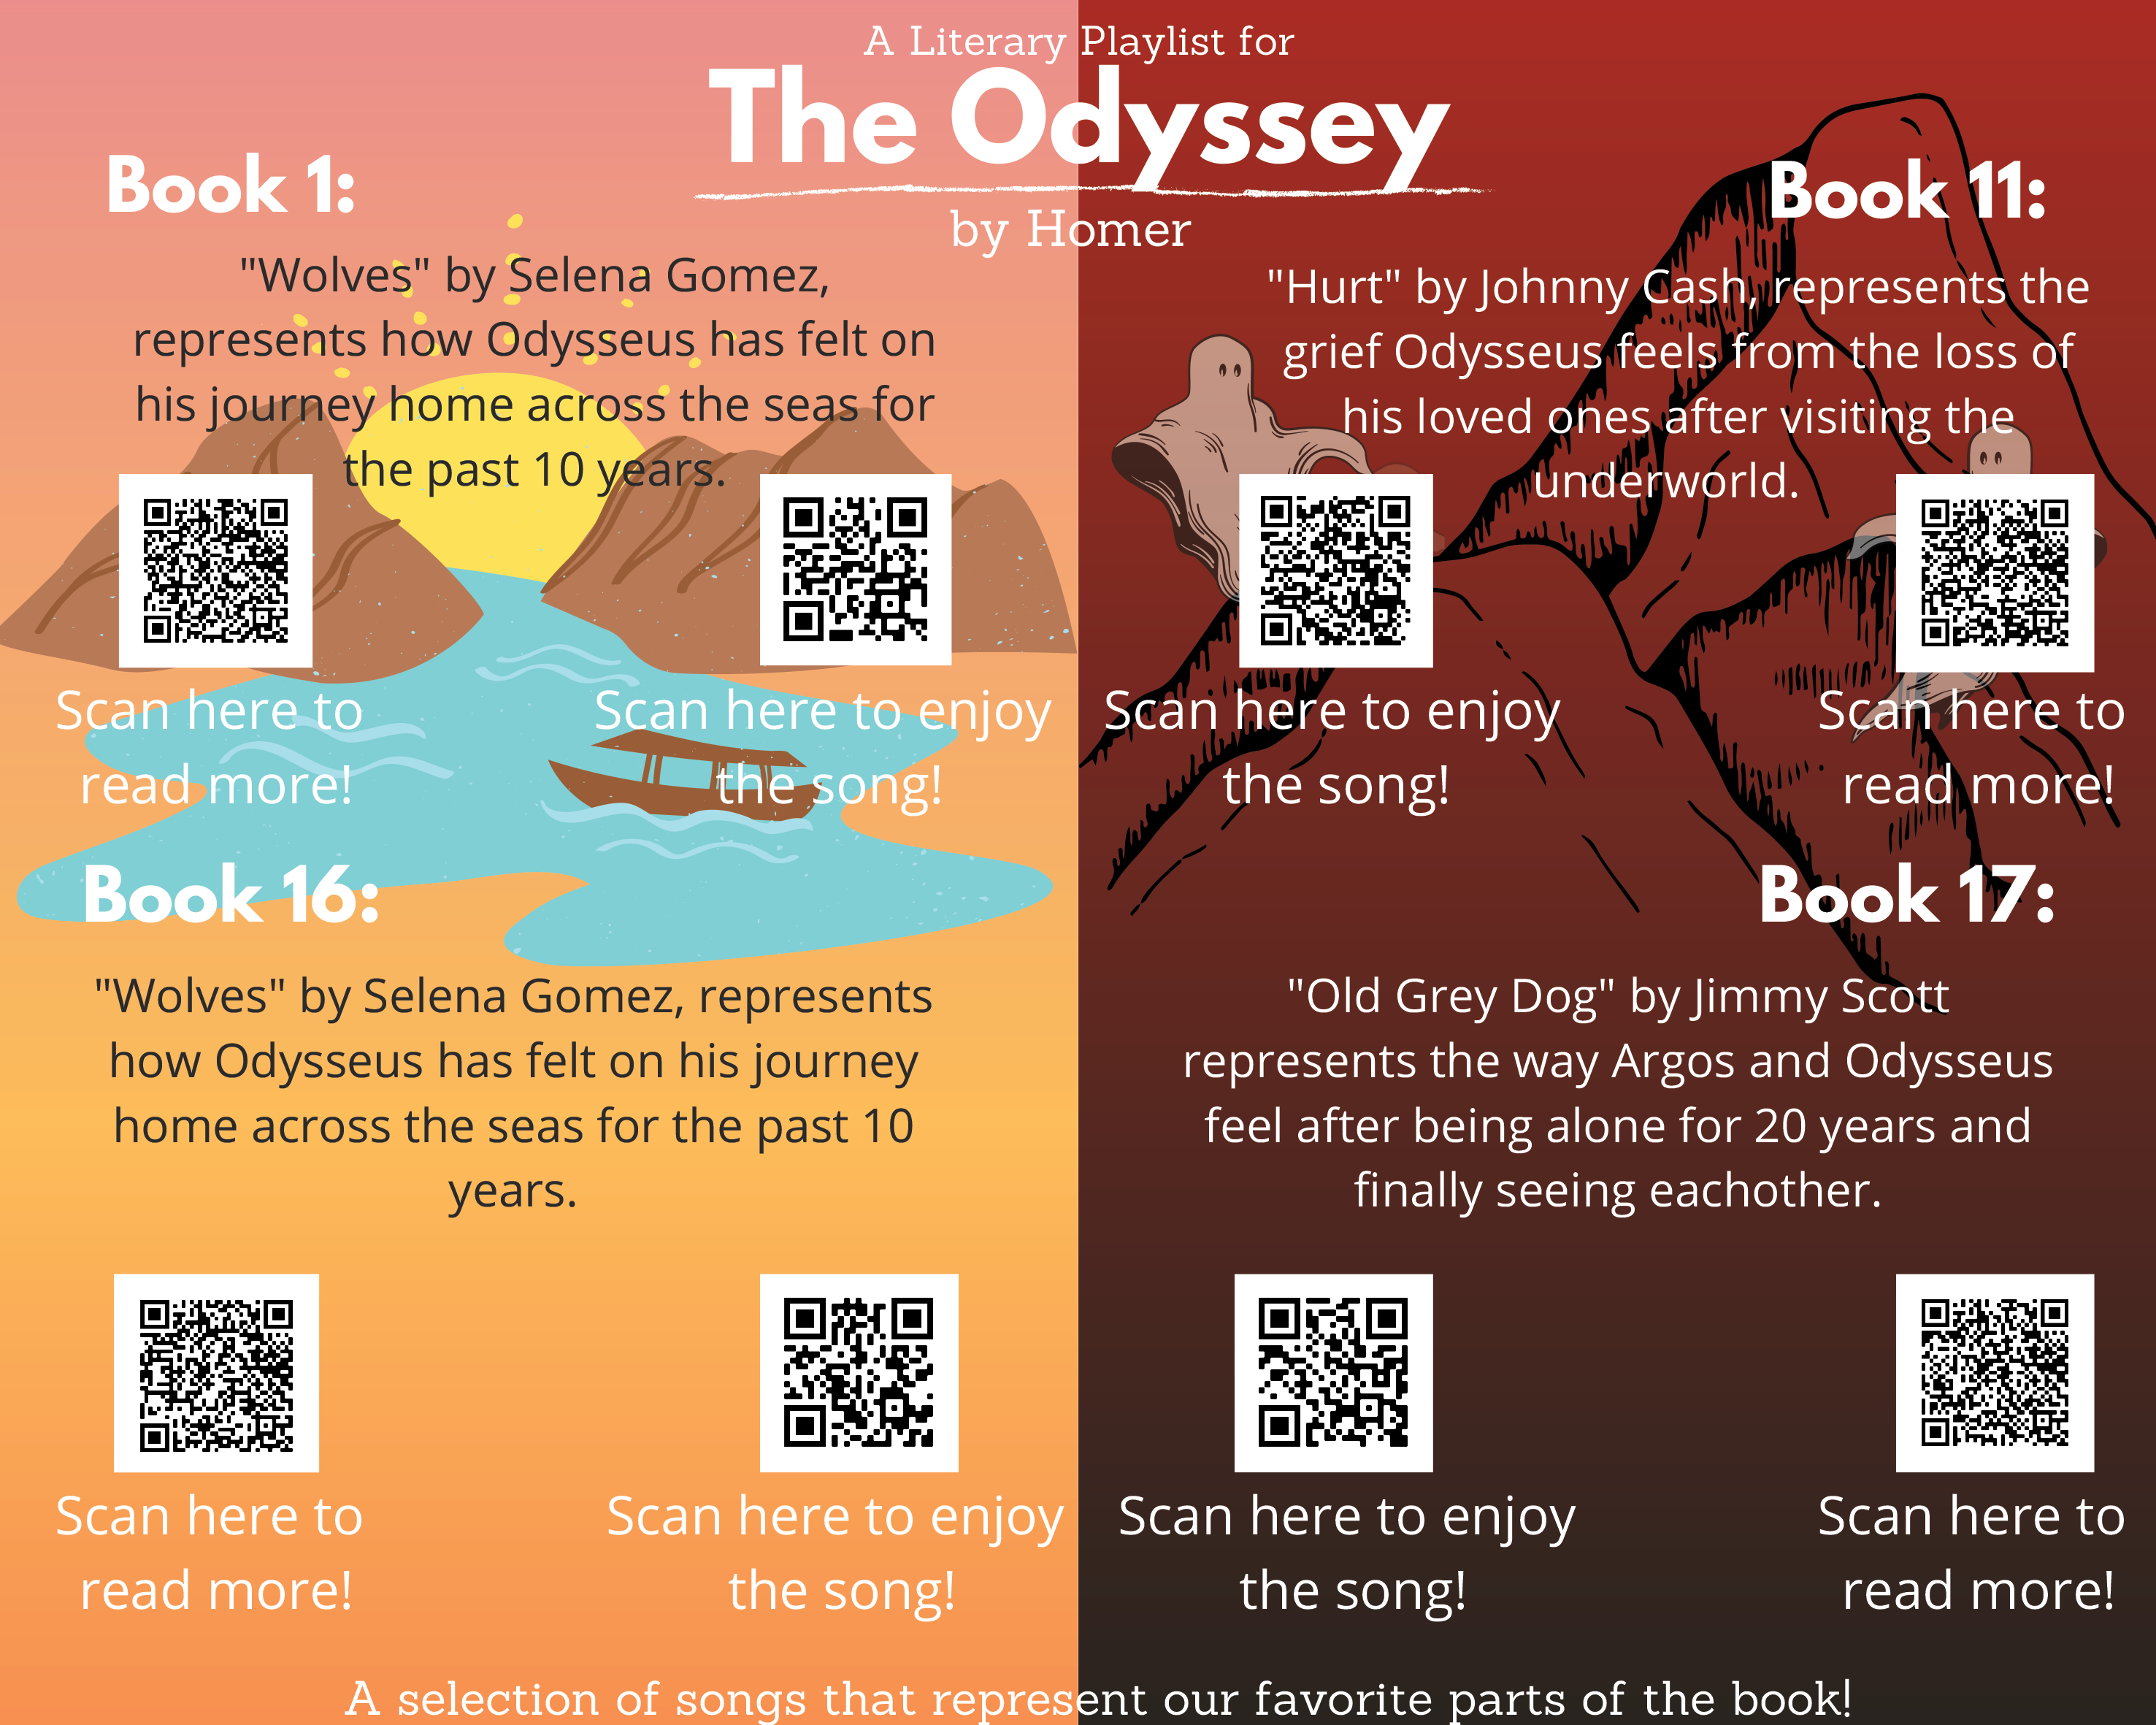 The Odyssey Infographic #7: Literary Playlist Project